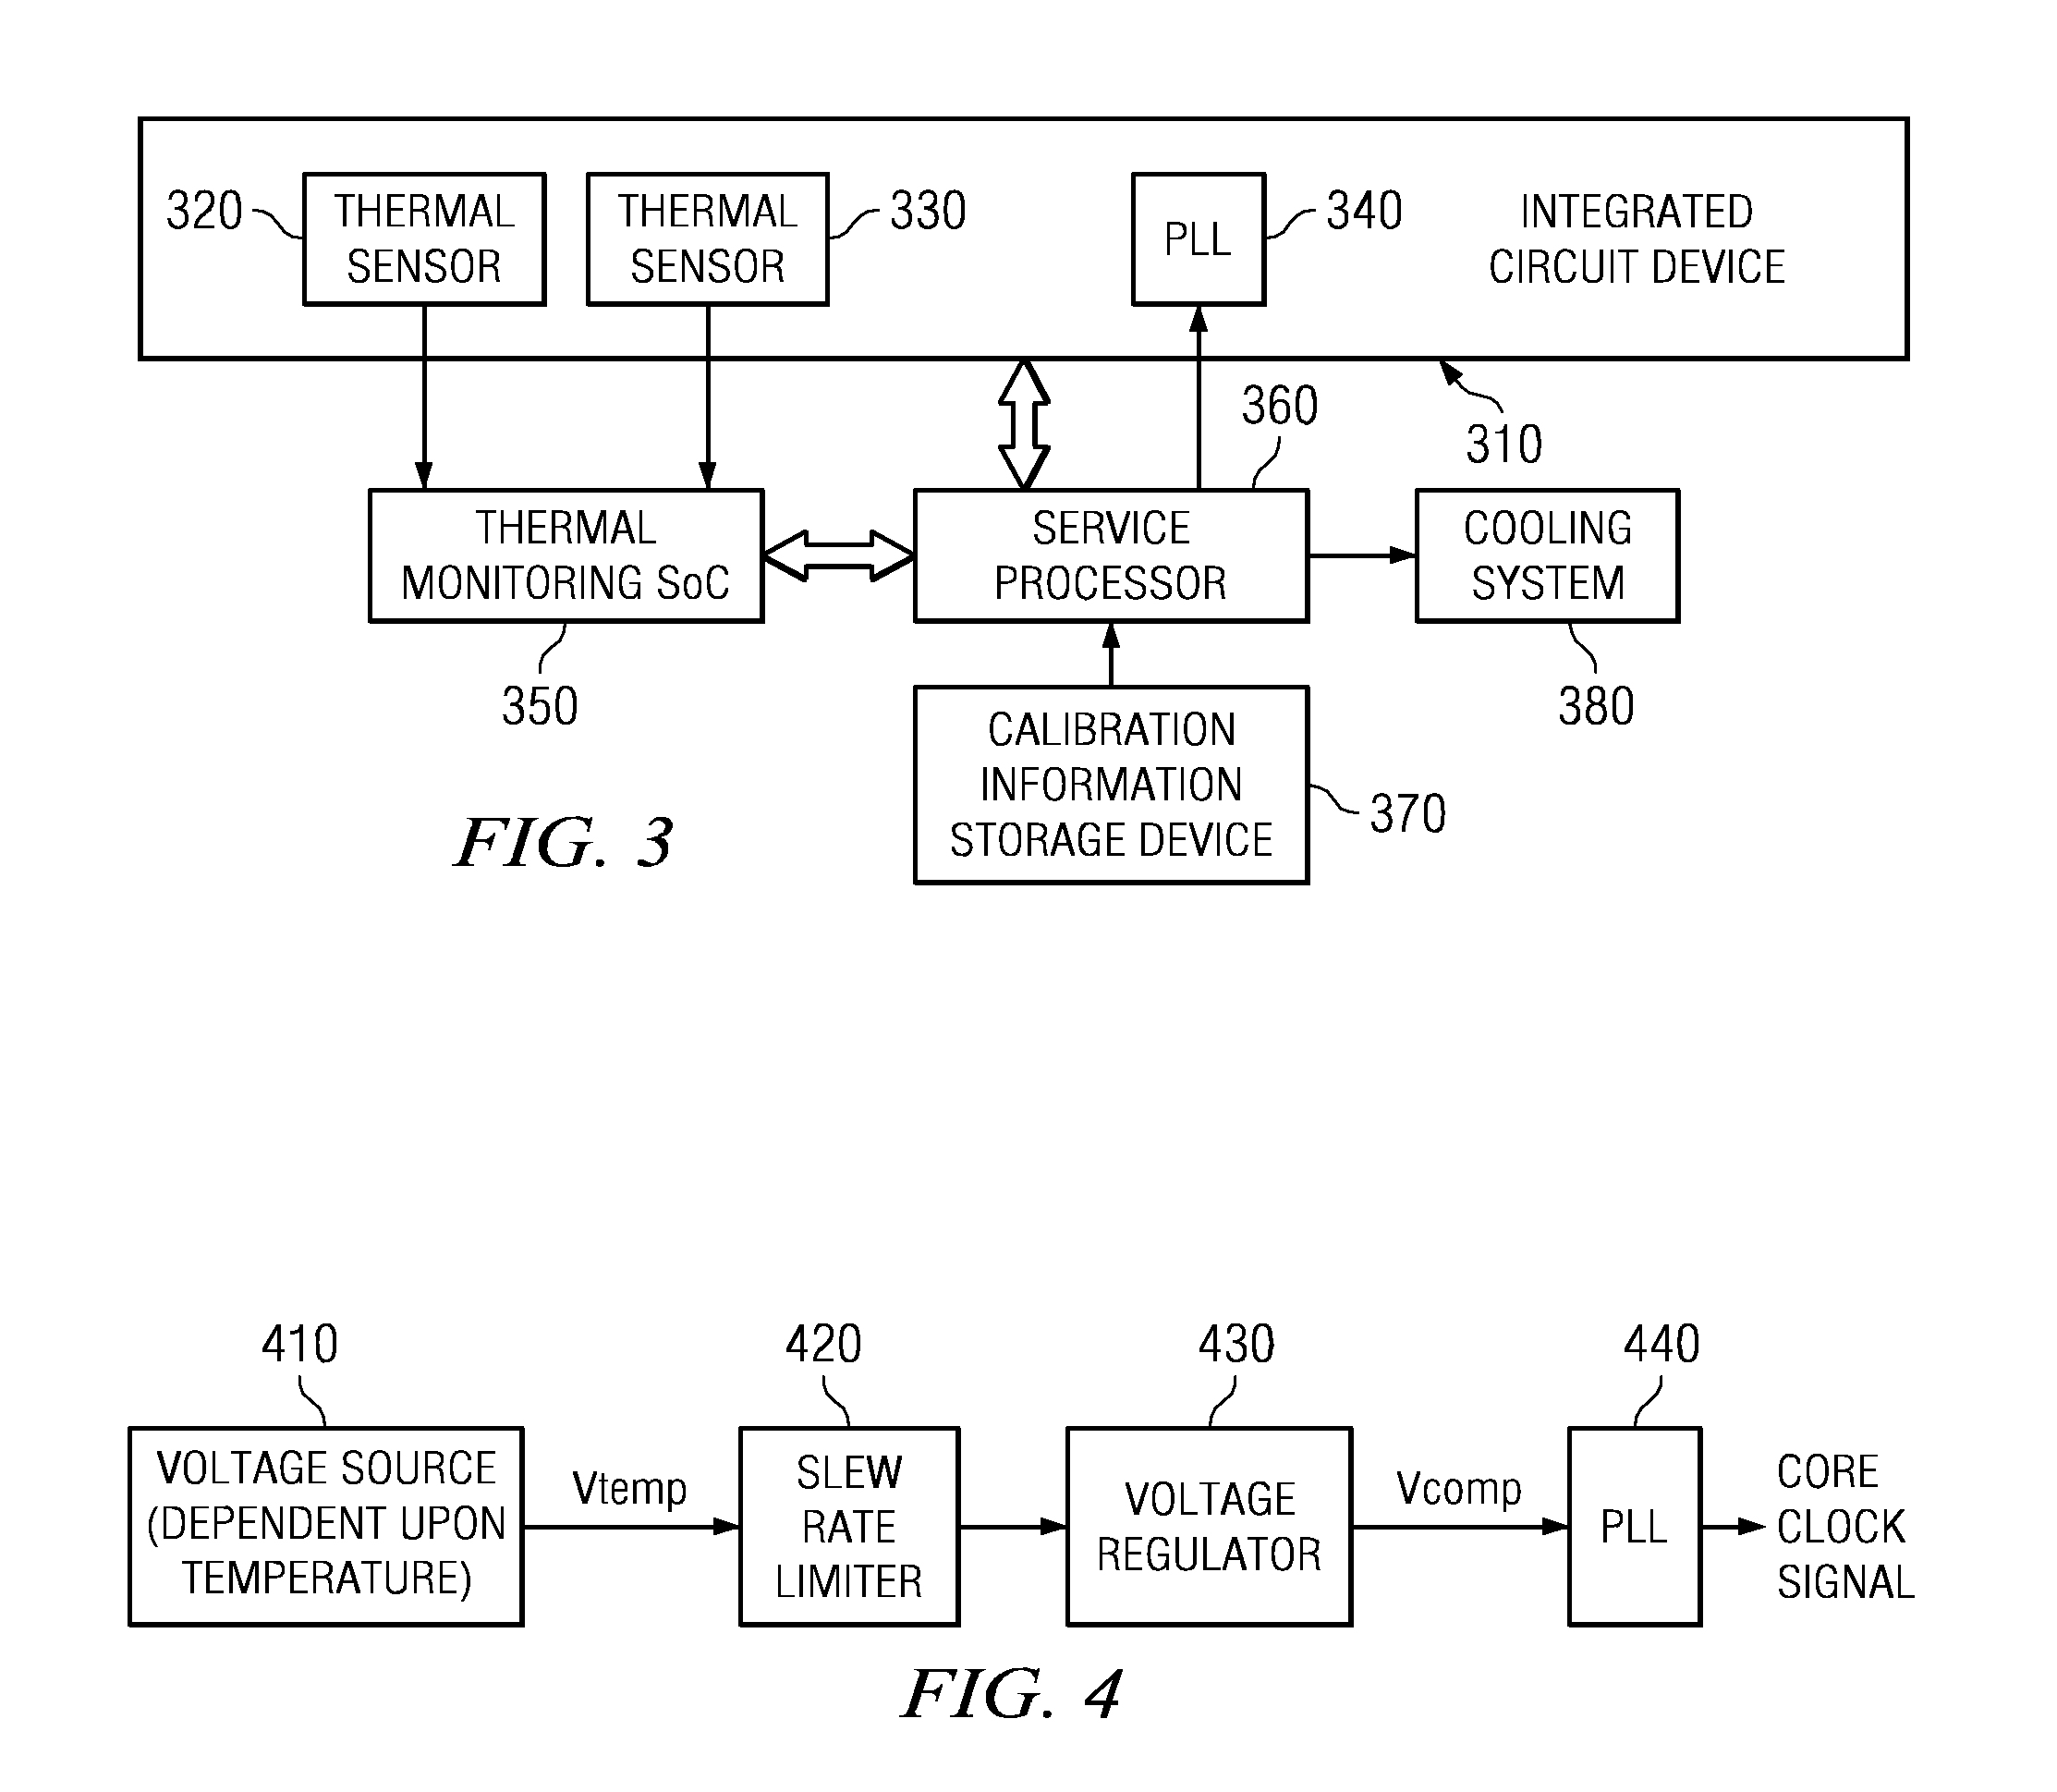 Structure for a Phase Locked Loop with Adjustable Voltage Based on Temperature